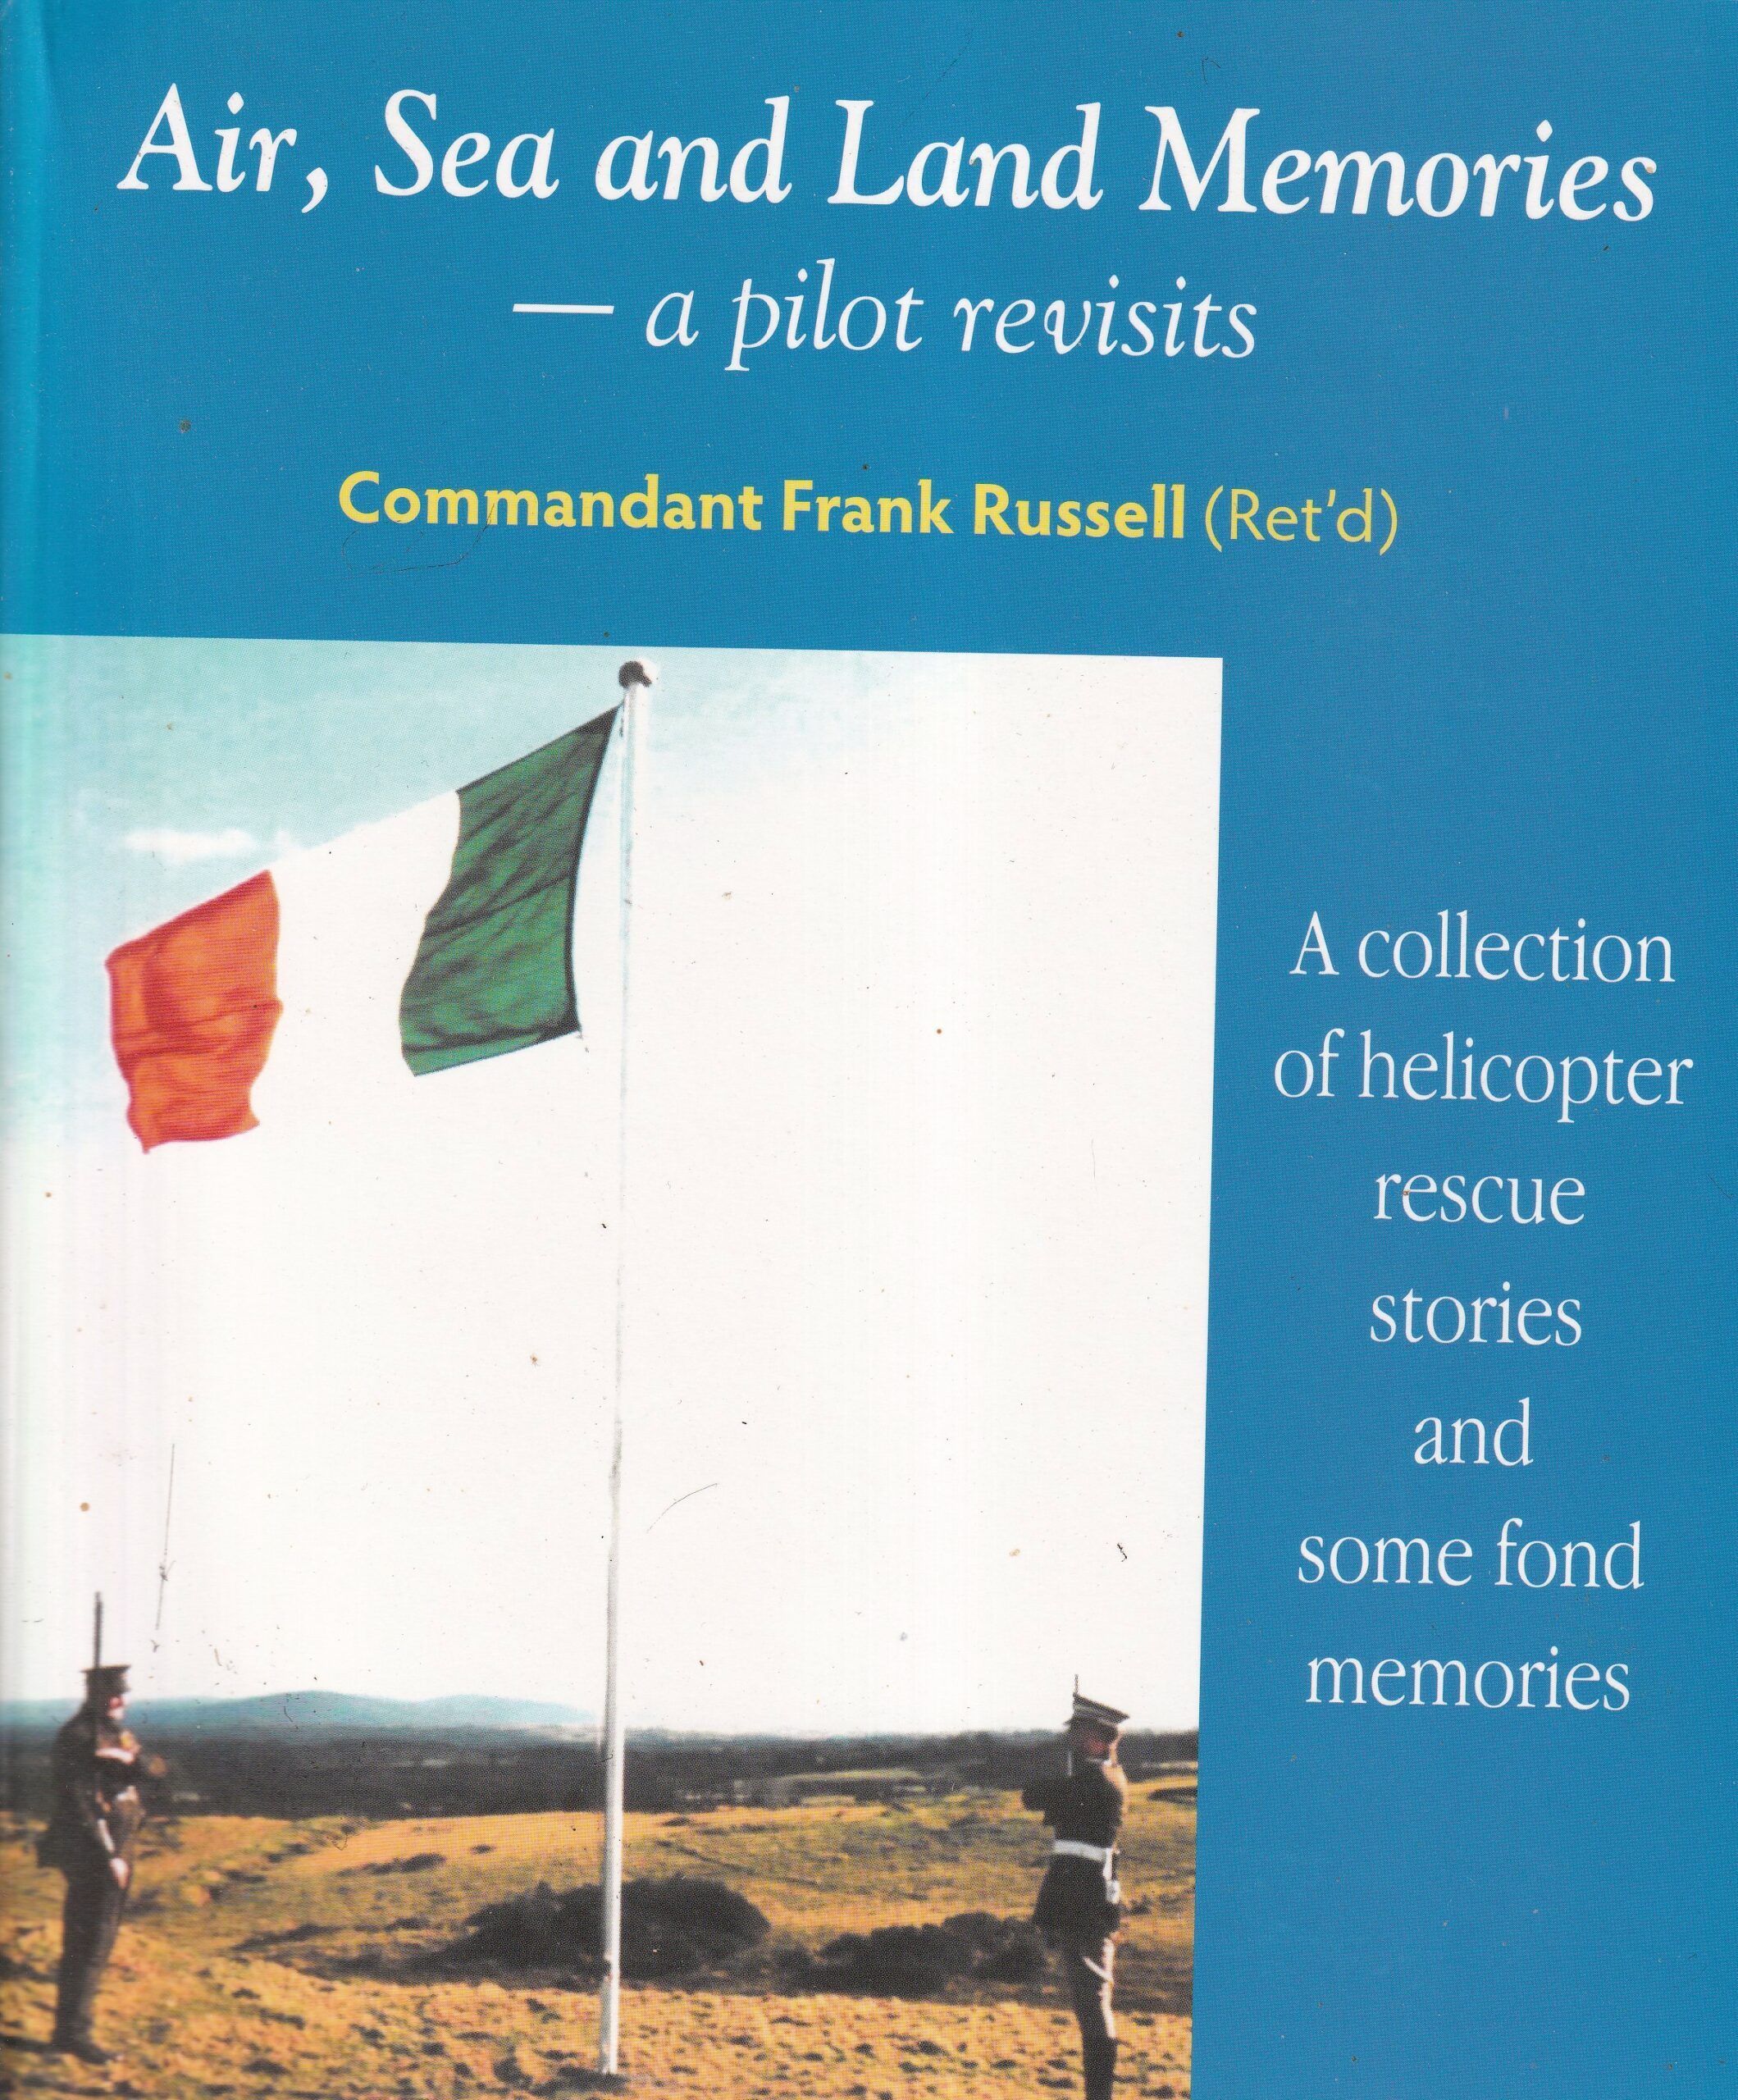 Air, Sea and Land Memories- A Pilot Revisits: A Collection of Helicopter Rescue Stories and Some Fond Memories | Frank Russell | Charlie Byrne's